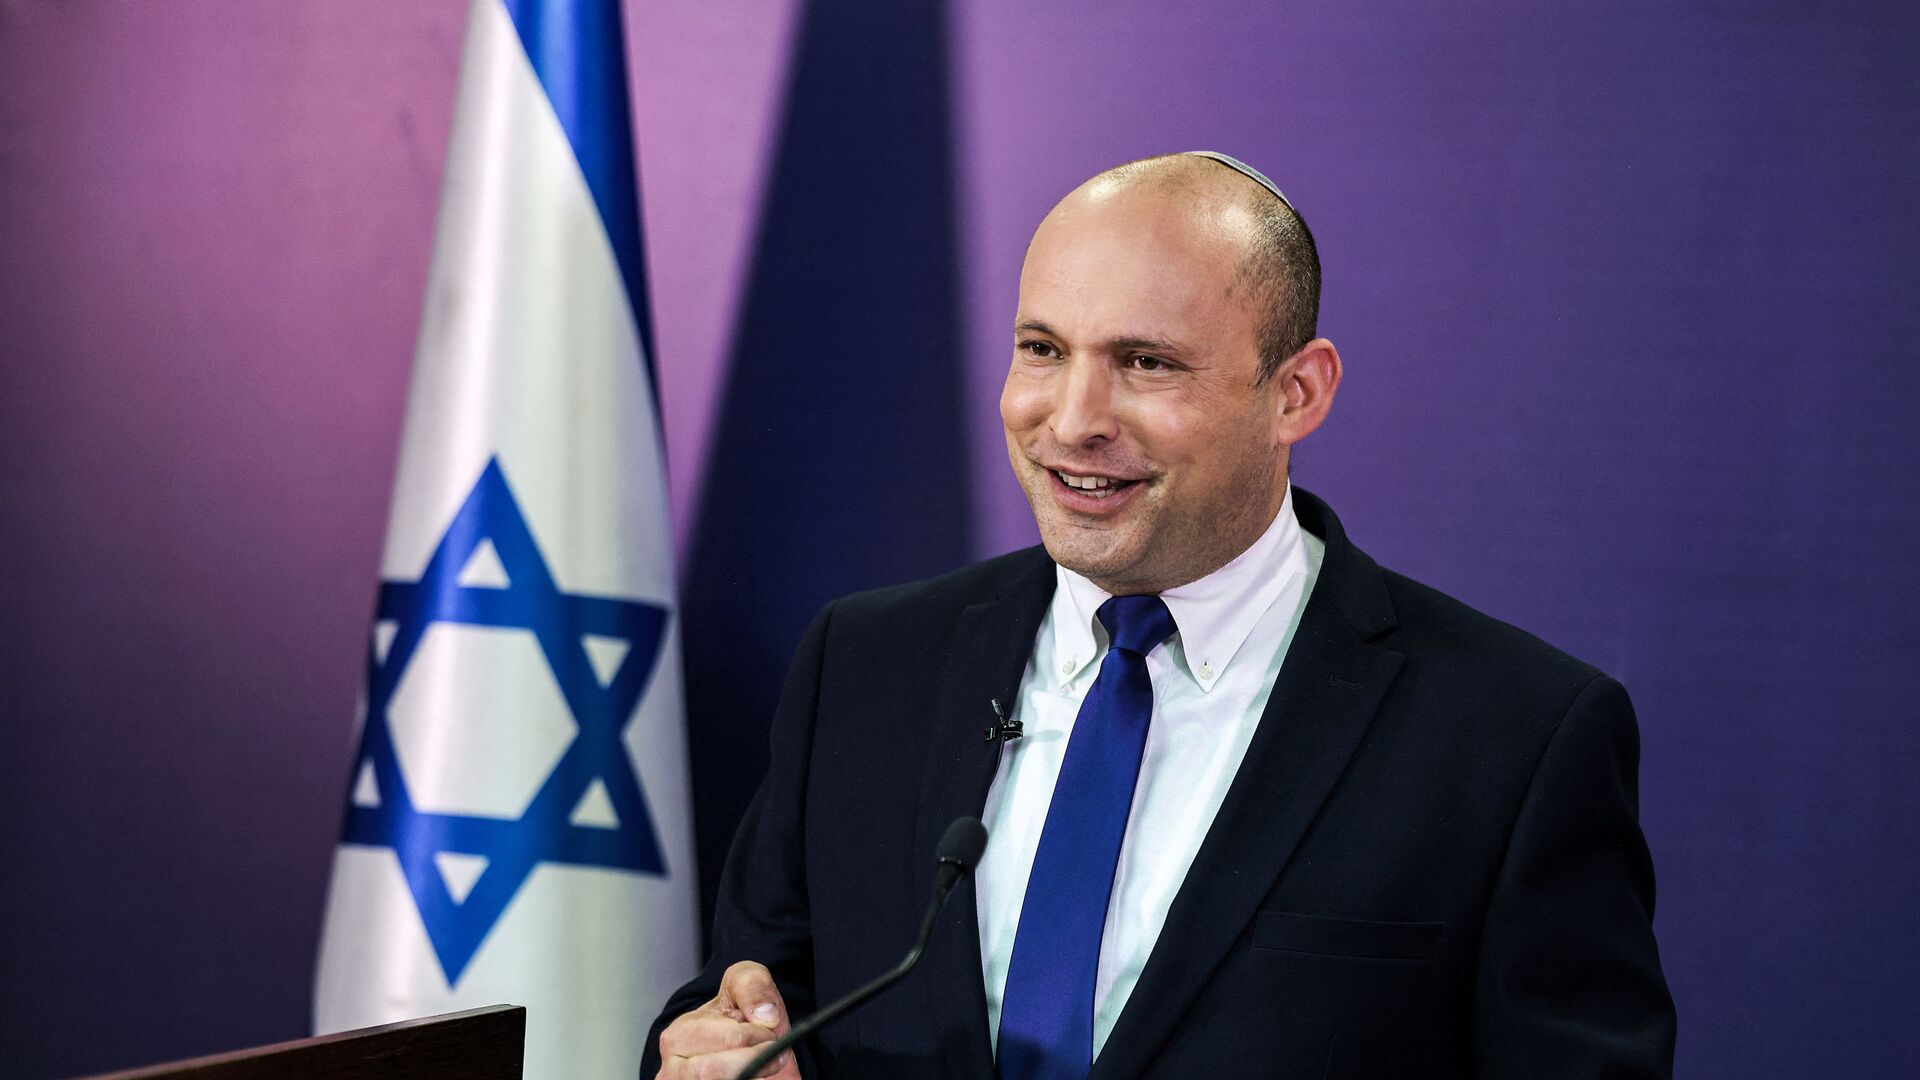 Naftali Bennett, Israeli parliament member from the Yamina party, gives a statement at the Knesset, Israel's parliament, in Jerusalem on June 6, 2021. - In power for 12 consecutive years, Israel's embattled Prime Minister Benjamin Netanyahu faces being toppled by a motley coalition of lawmakers united only by their shared hostility towards him. Under the agreement, the right-wing nationalist Bennett would be premier for two years, to be replaced by the centrist Yair Lapid of the Yesh Atid party in 2023. - Sputnik International, 1920, 24.05.2022